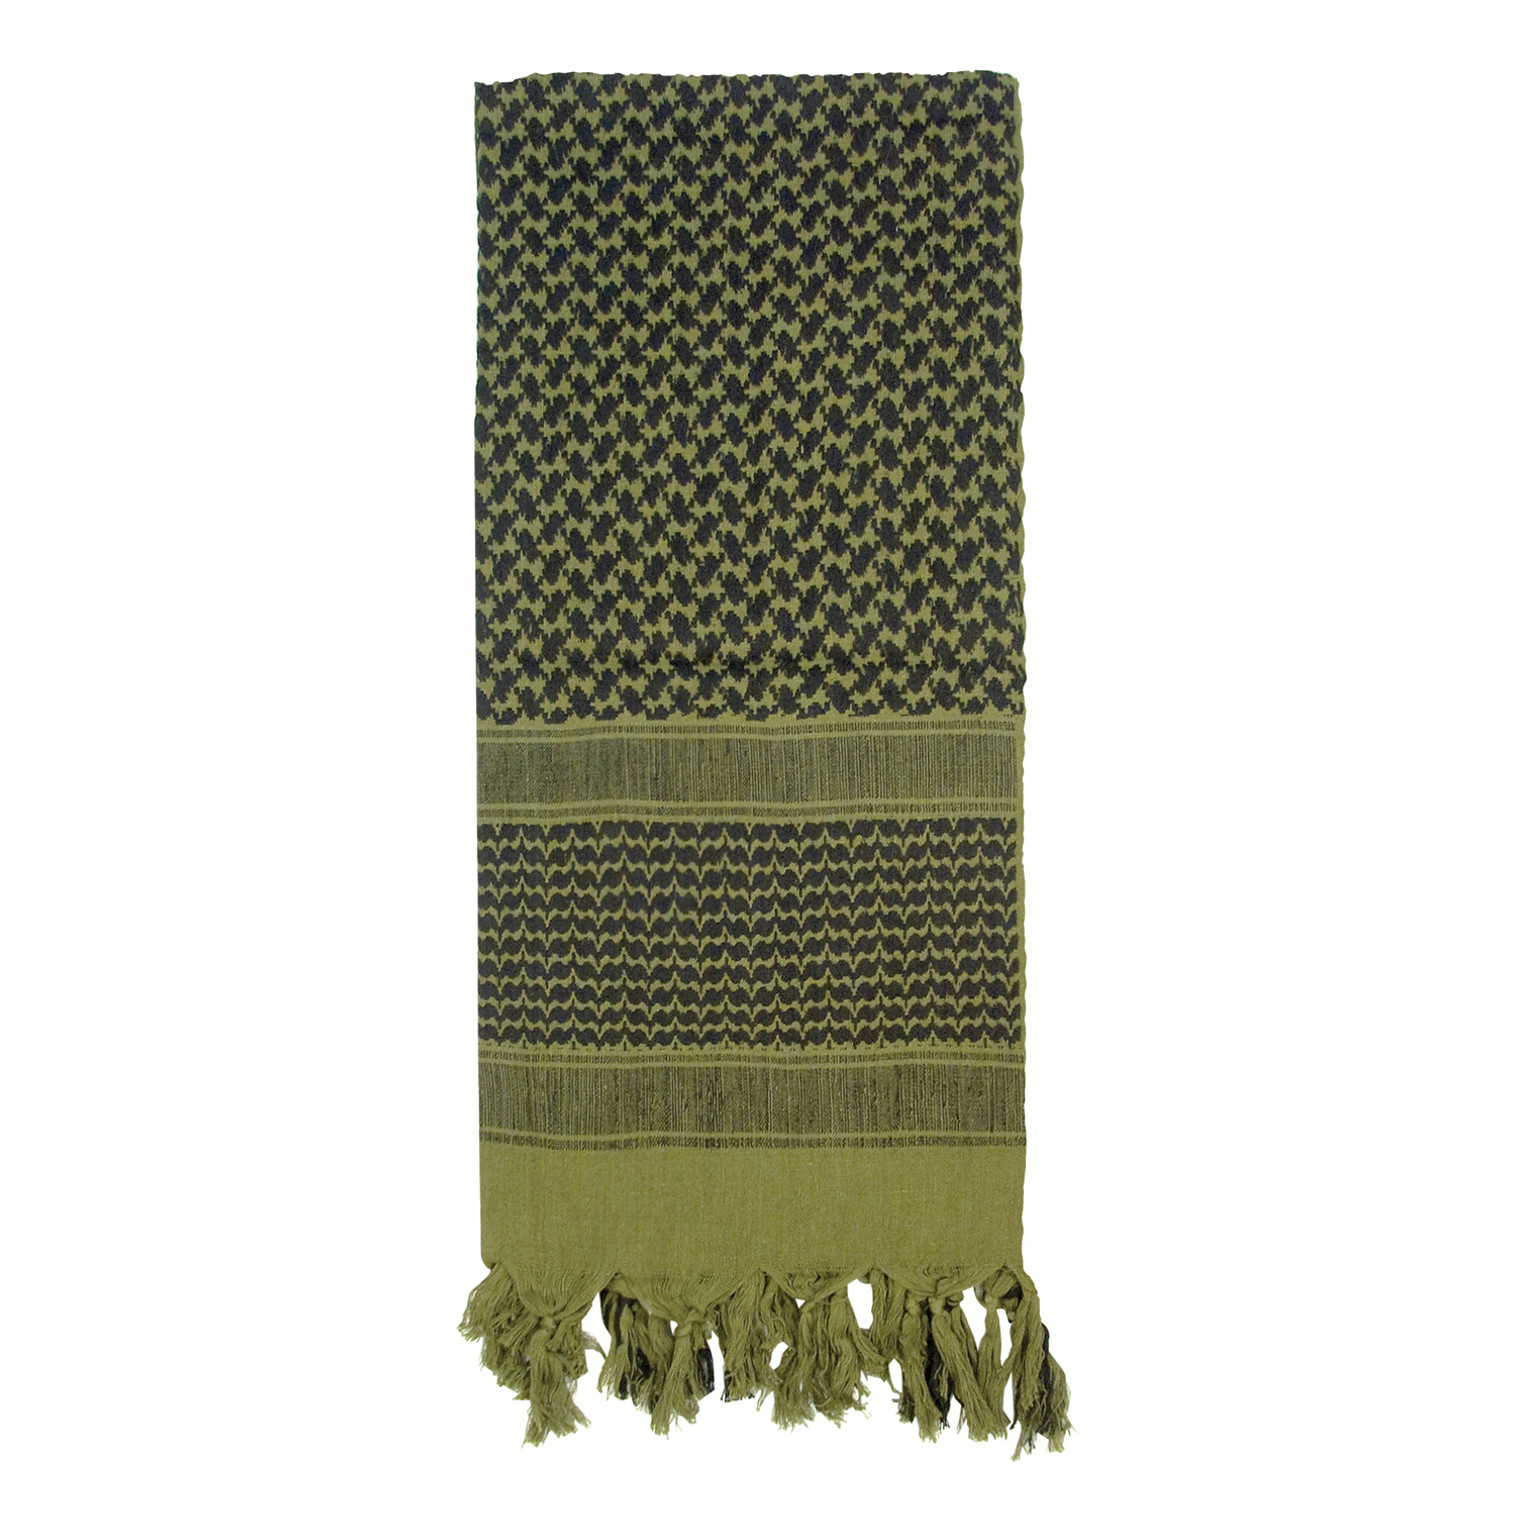 Rothco Lightweight Shemagh Tactical Desert Keffiyeh Scarf - Olive Drab